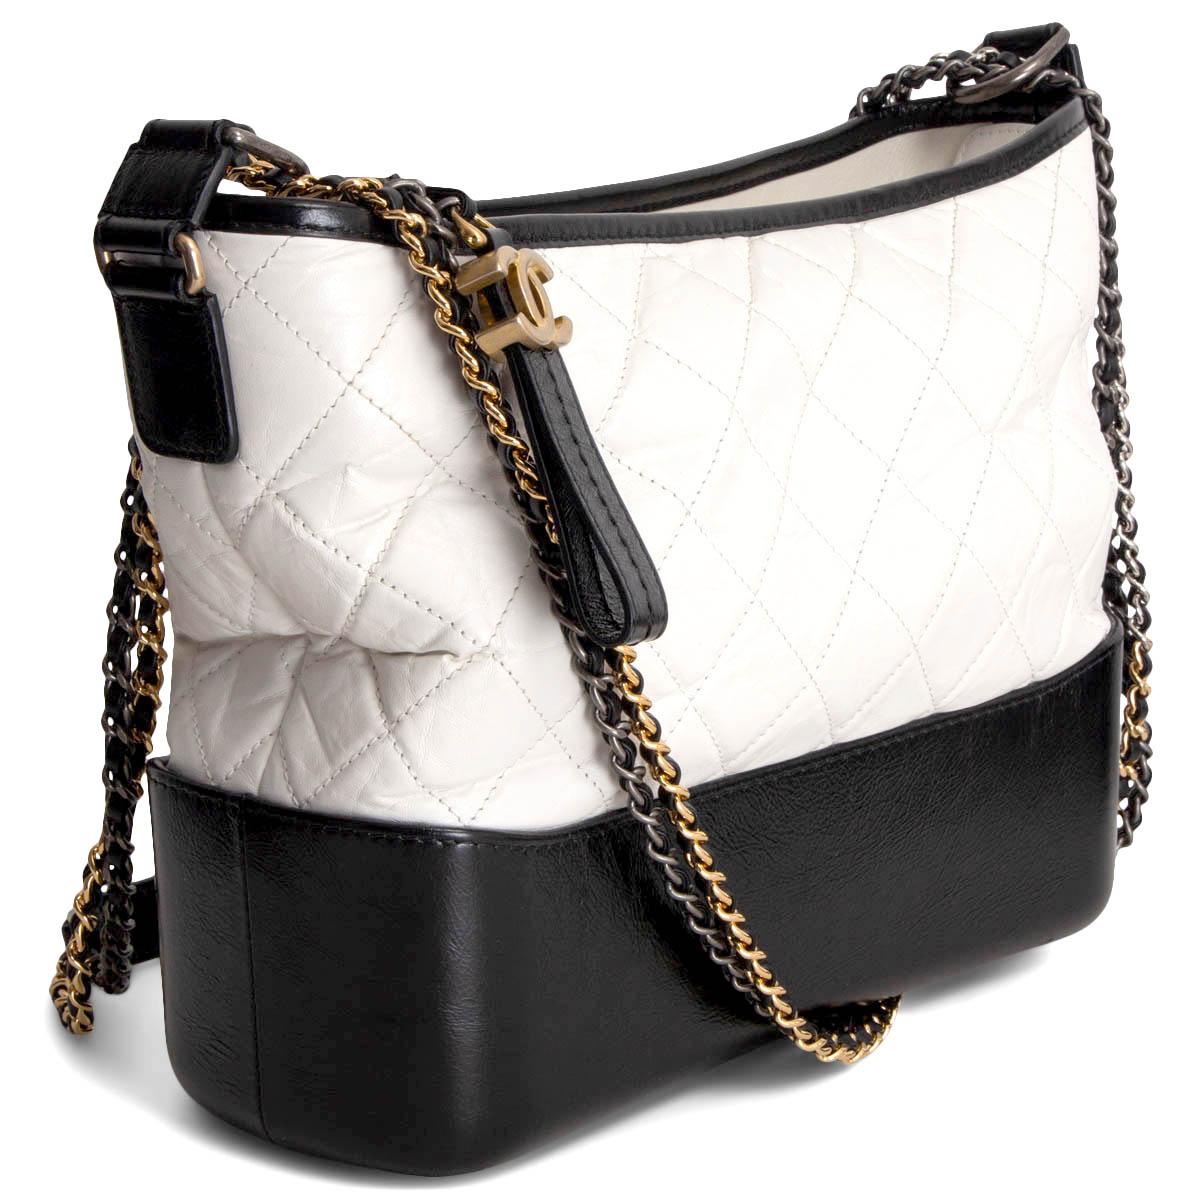 100% authentic Chanel 'Gabrielle Medium' Hobo bag in white aged calfskin and black smooth calfskin. From the 2017 fall/winter runway. Double chain shoulder-strap in gold-tone, silver-tone & ruthenium-finish metal. Opens with a CC zipper on top and